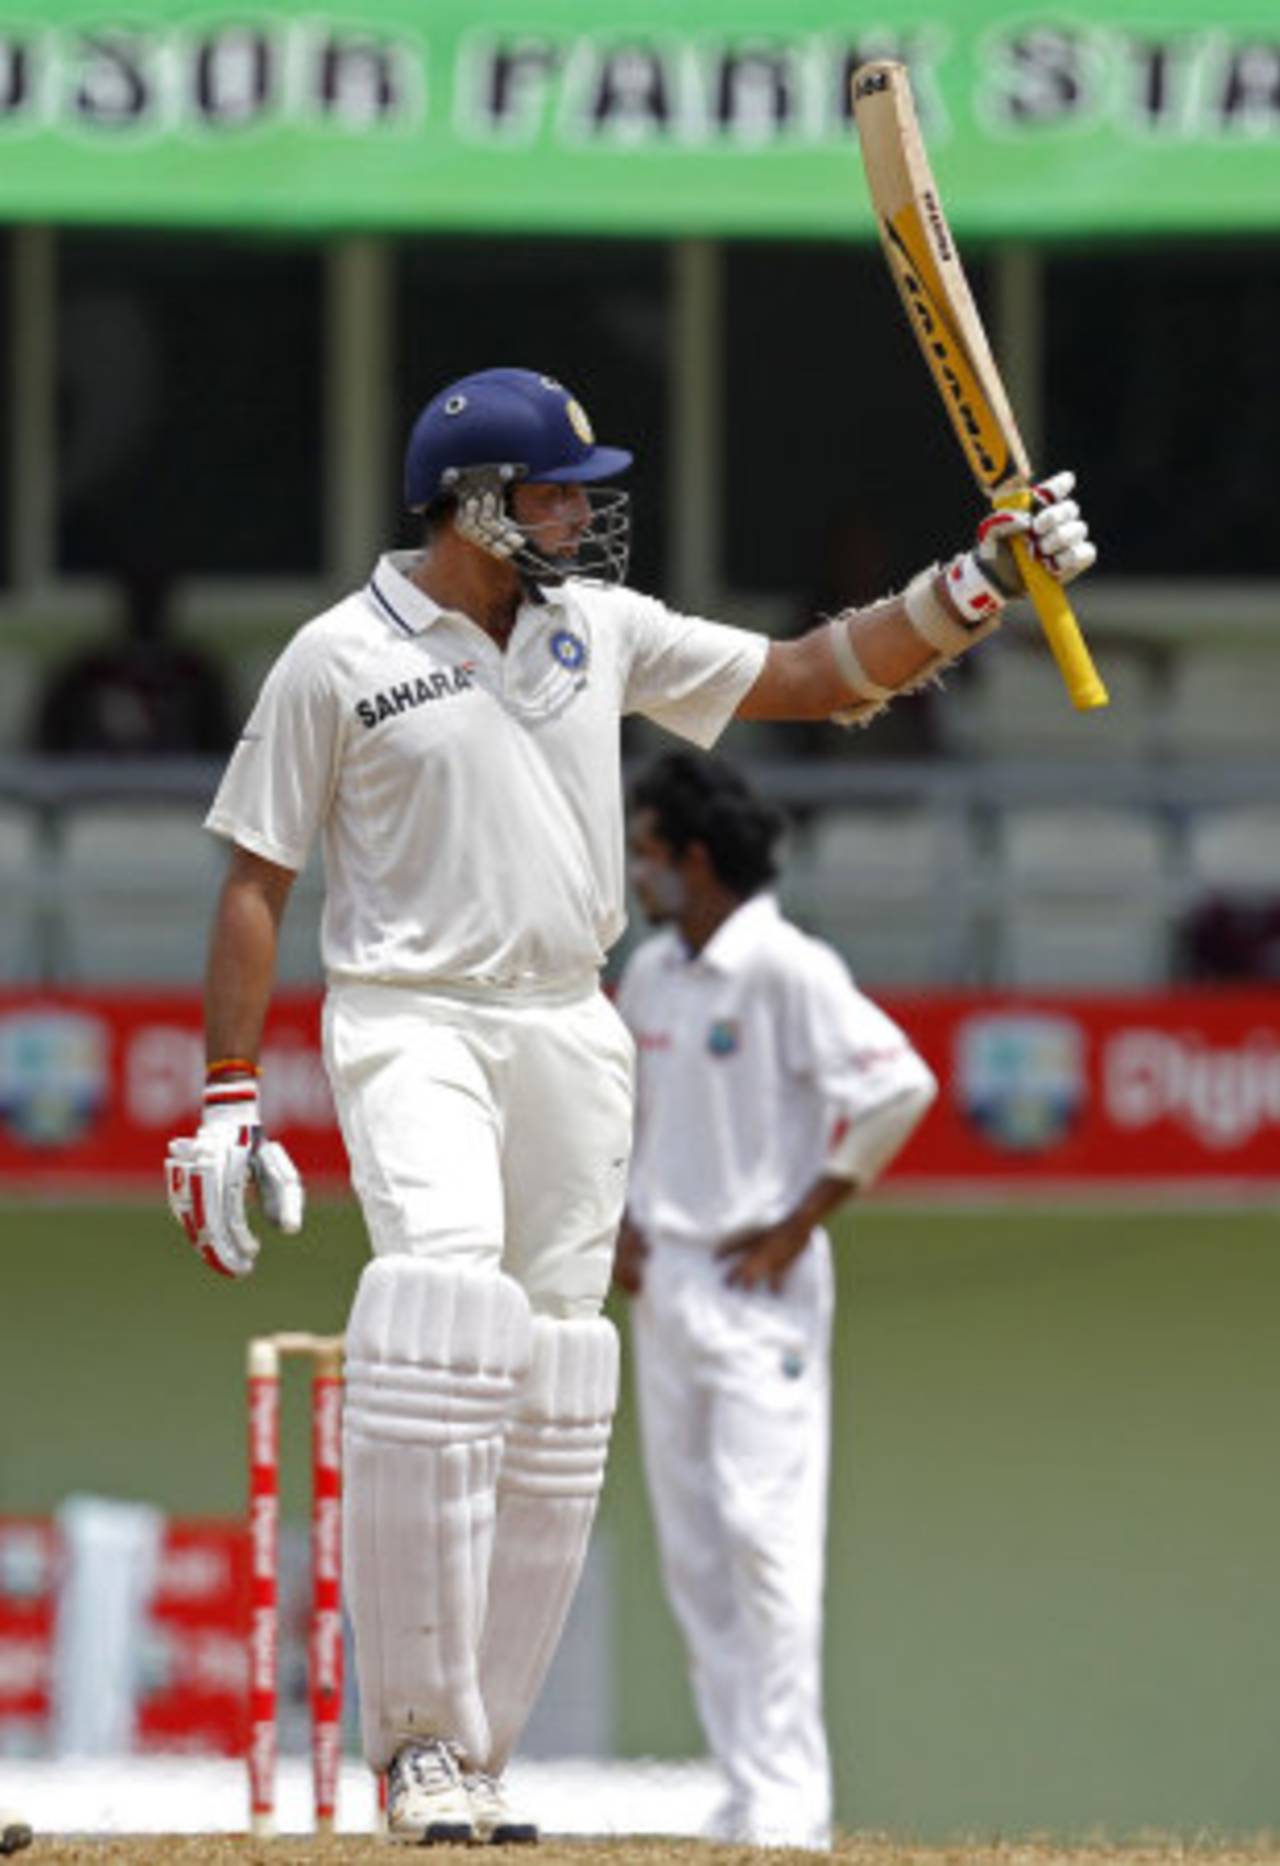 VVS Laxman celebrates getting to a half-century, West Indies v India, 3rd Test, Dominica, 3rd day, July 8, 2011